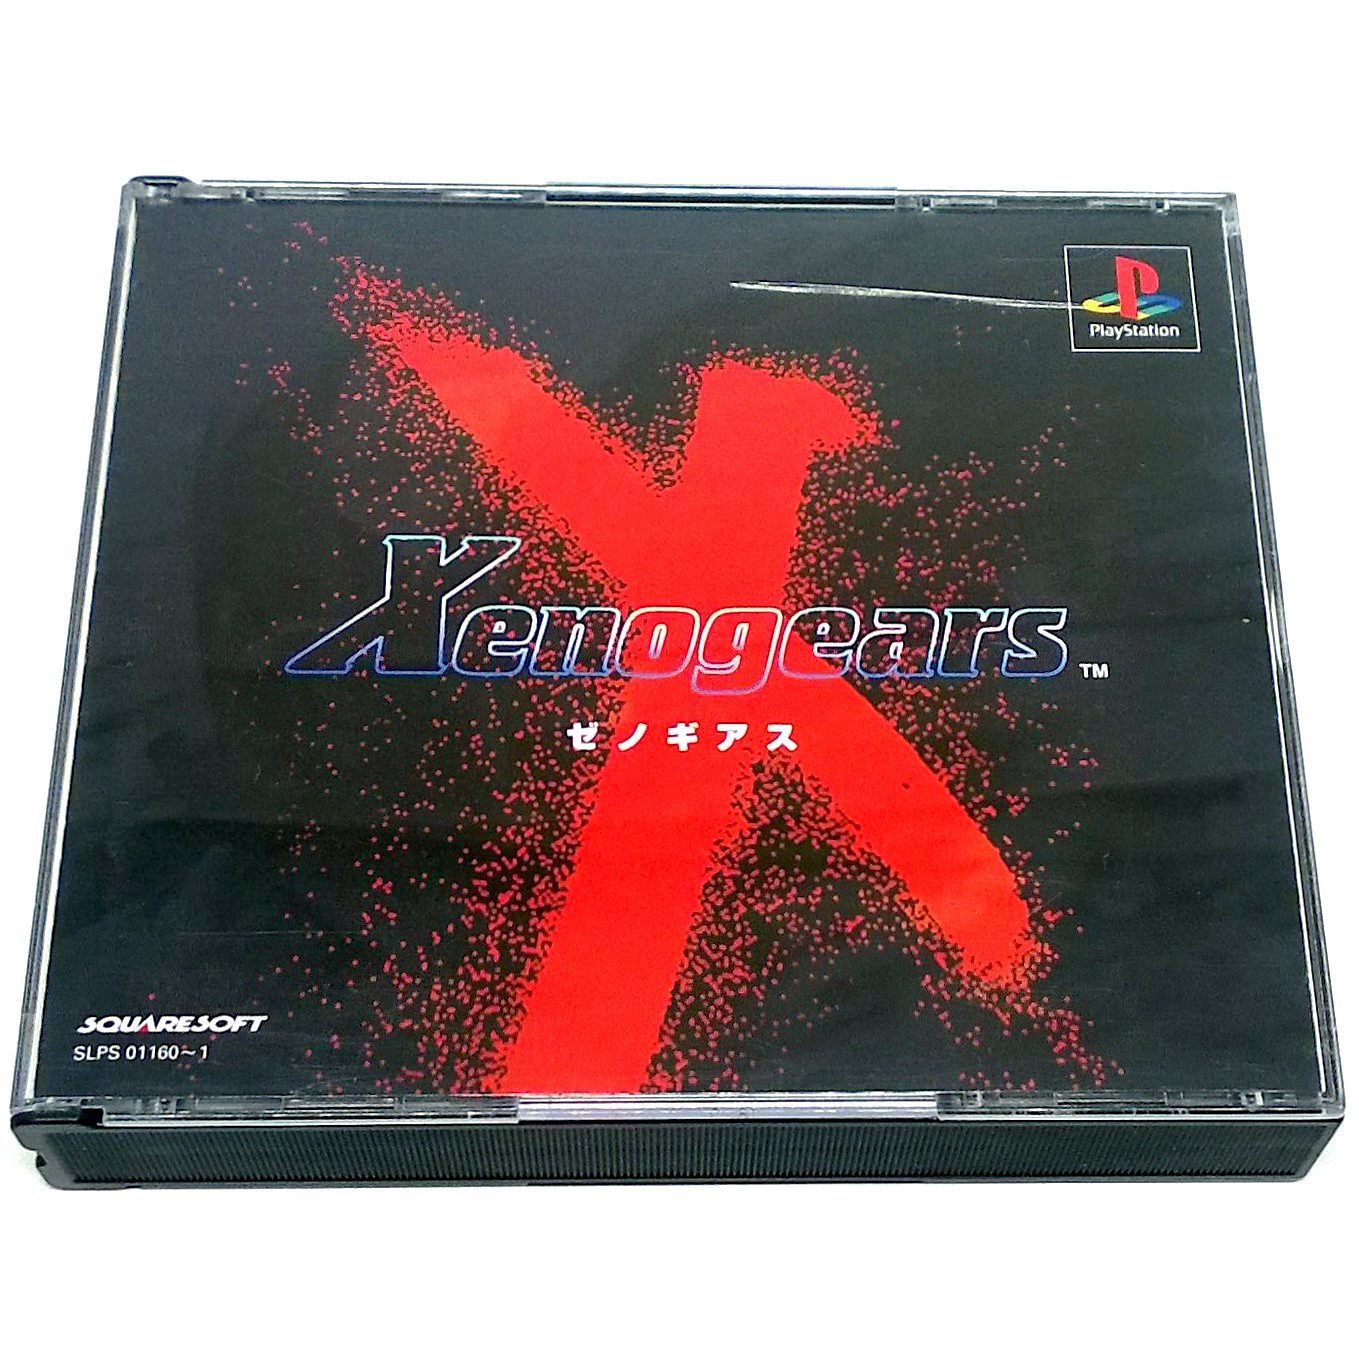 Xenogears for PlayStation (Import) - Front of case